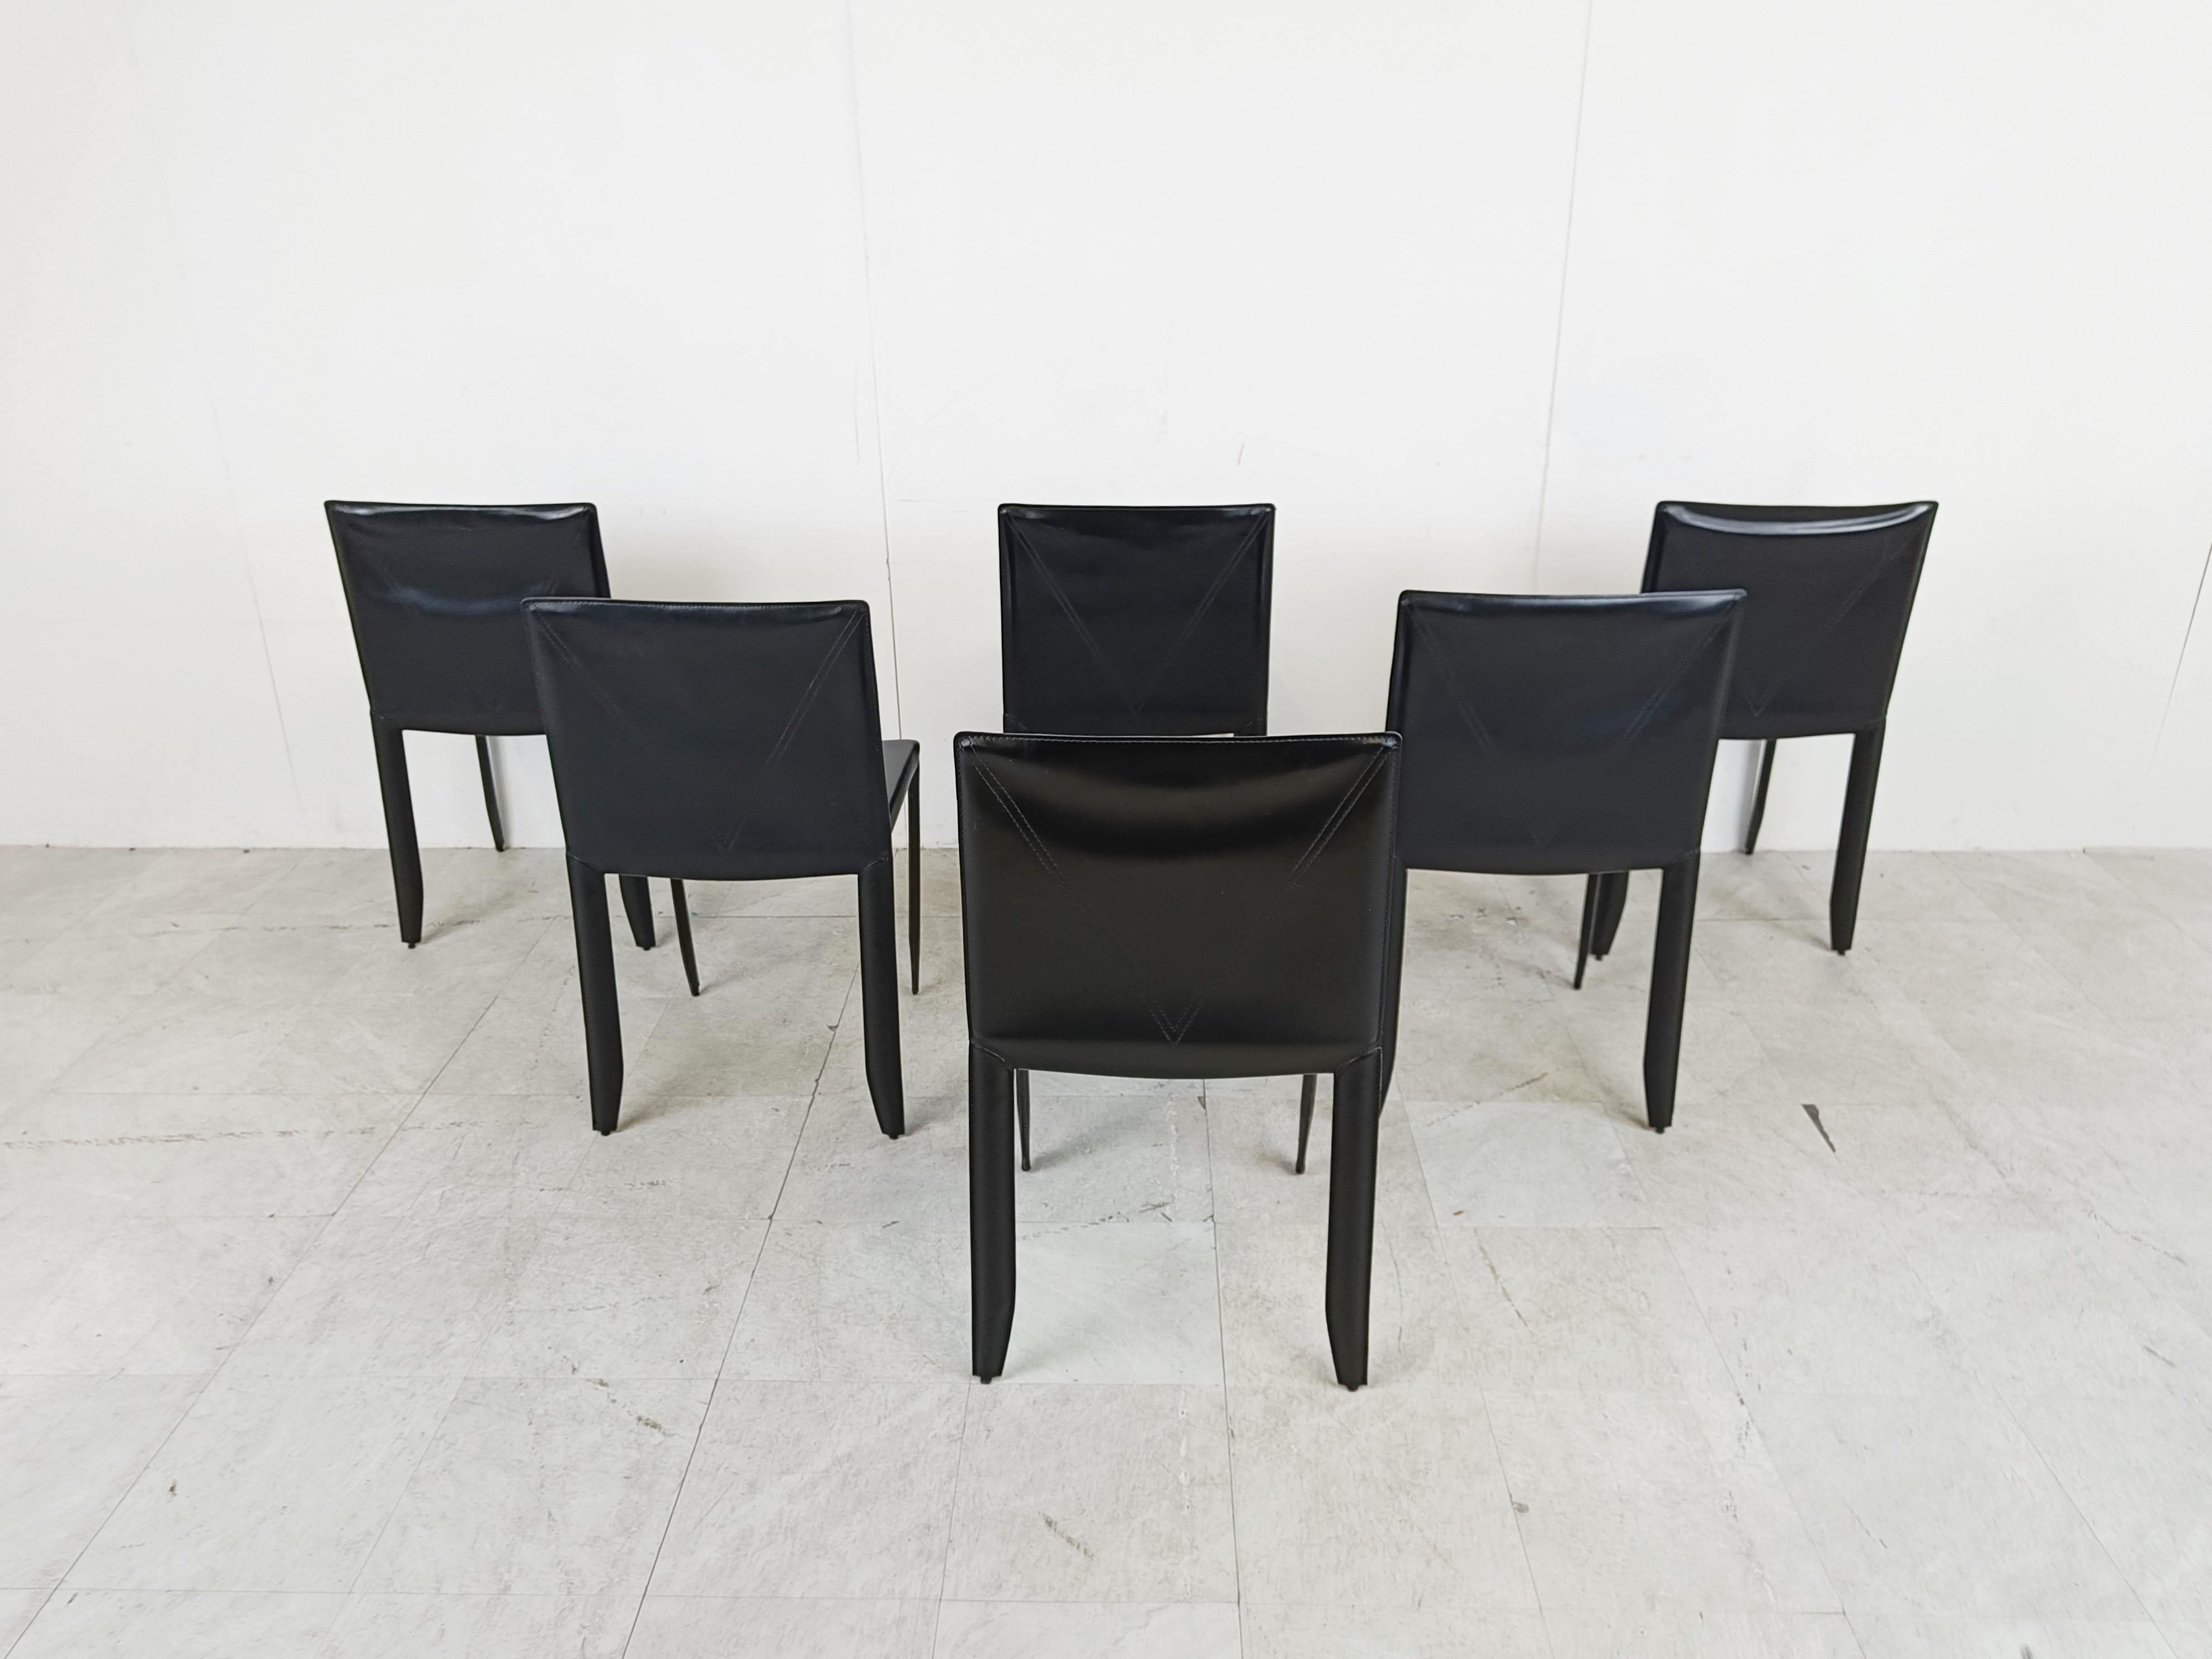 Black Leather Dining Chairs by Cattelan Italy, Set of 6 - 1980s For Sale 1